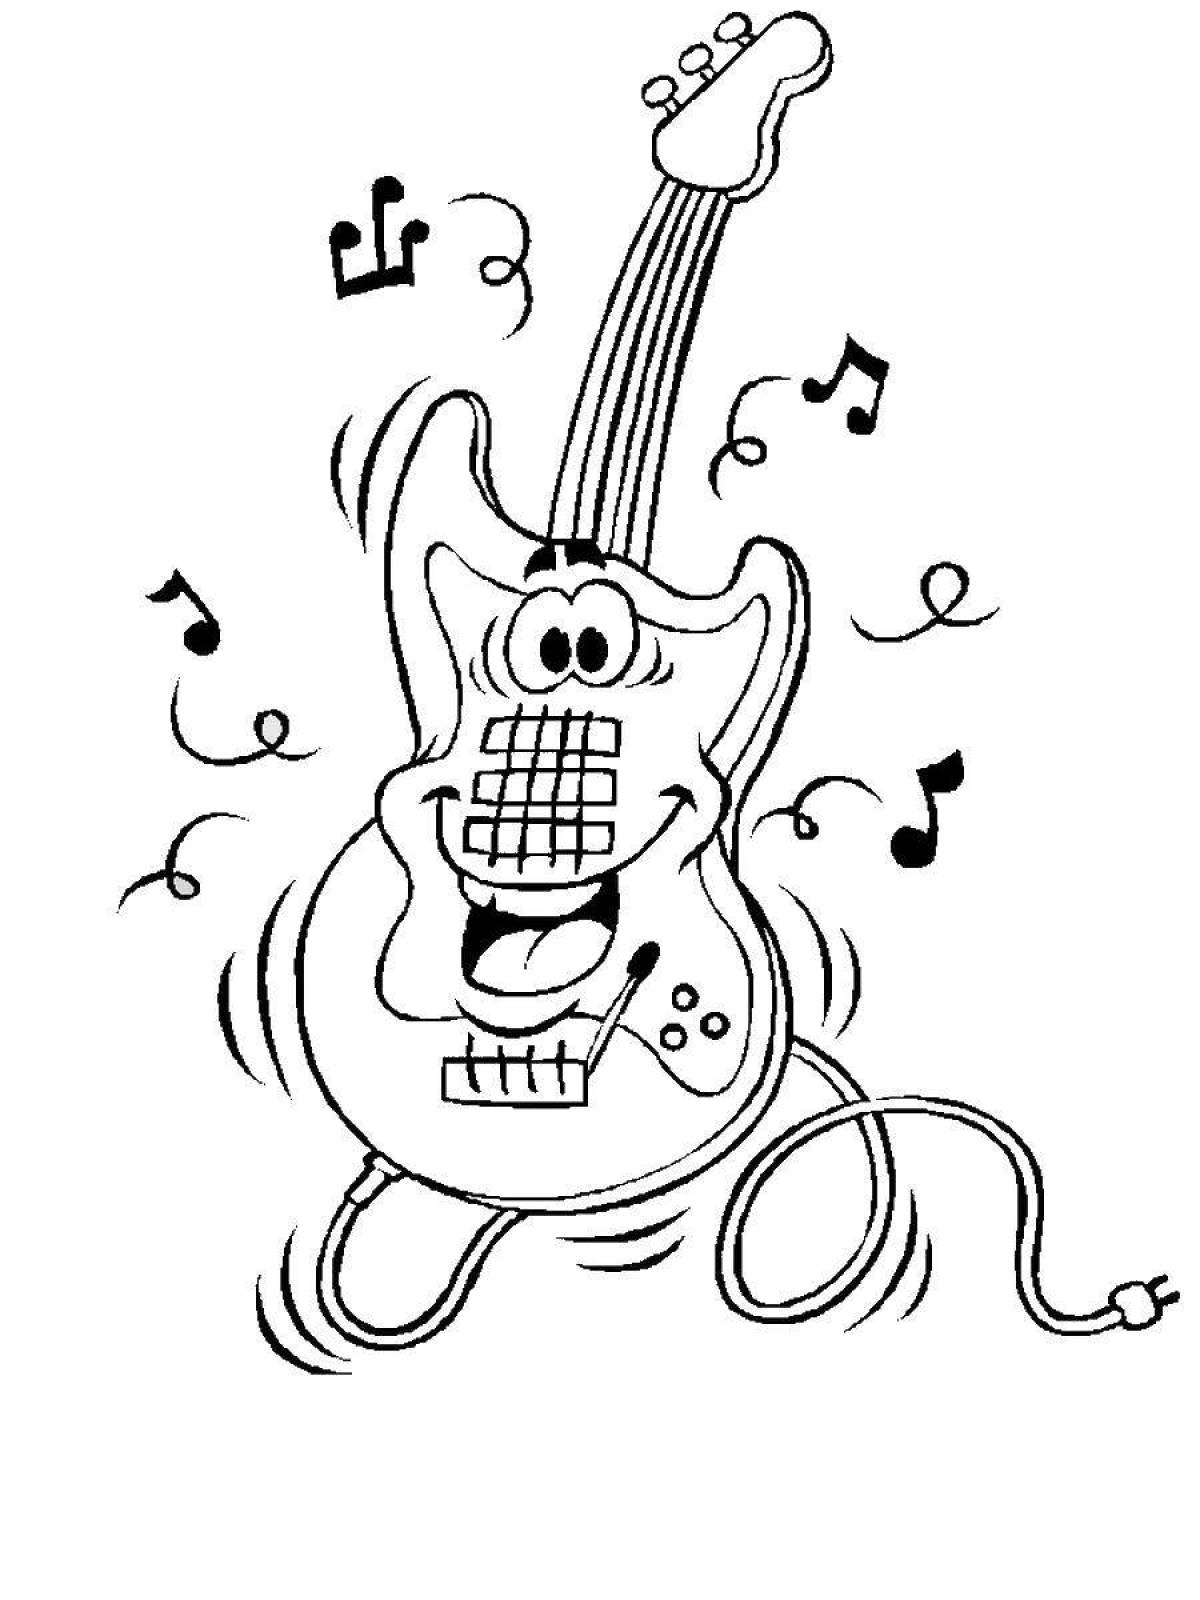 A fun coloring book with a musical theme